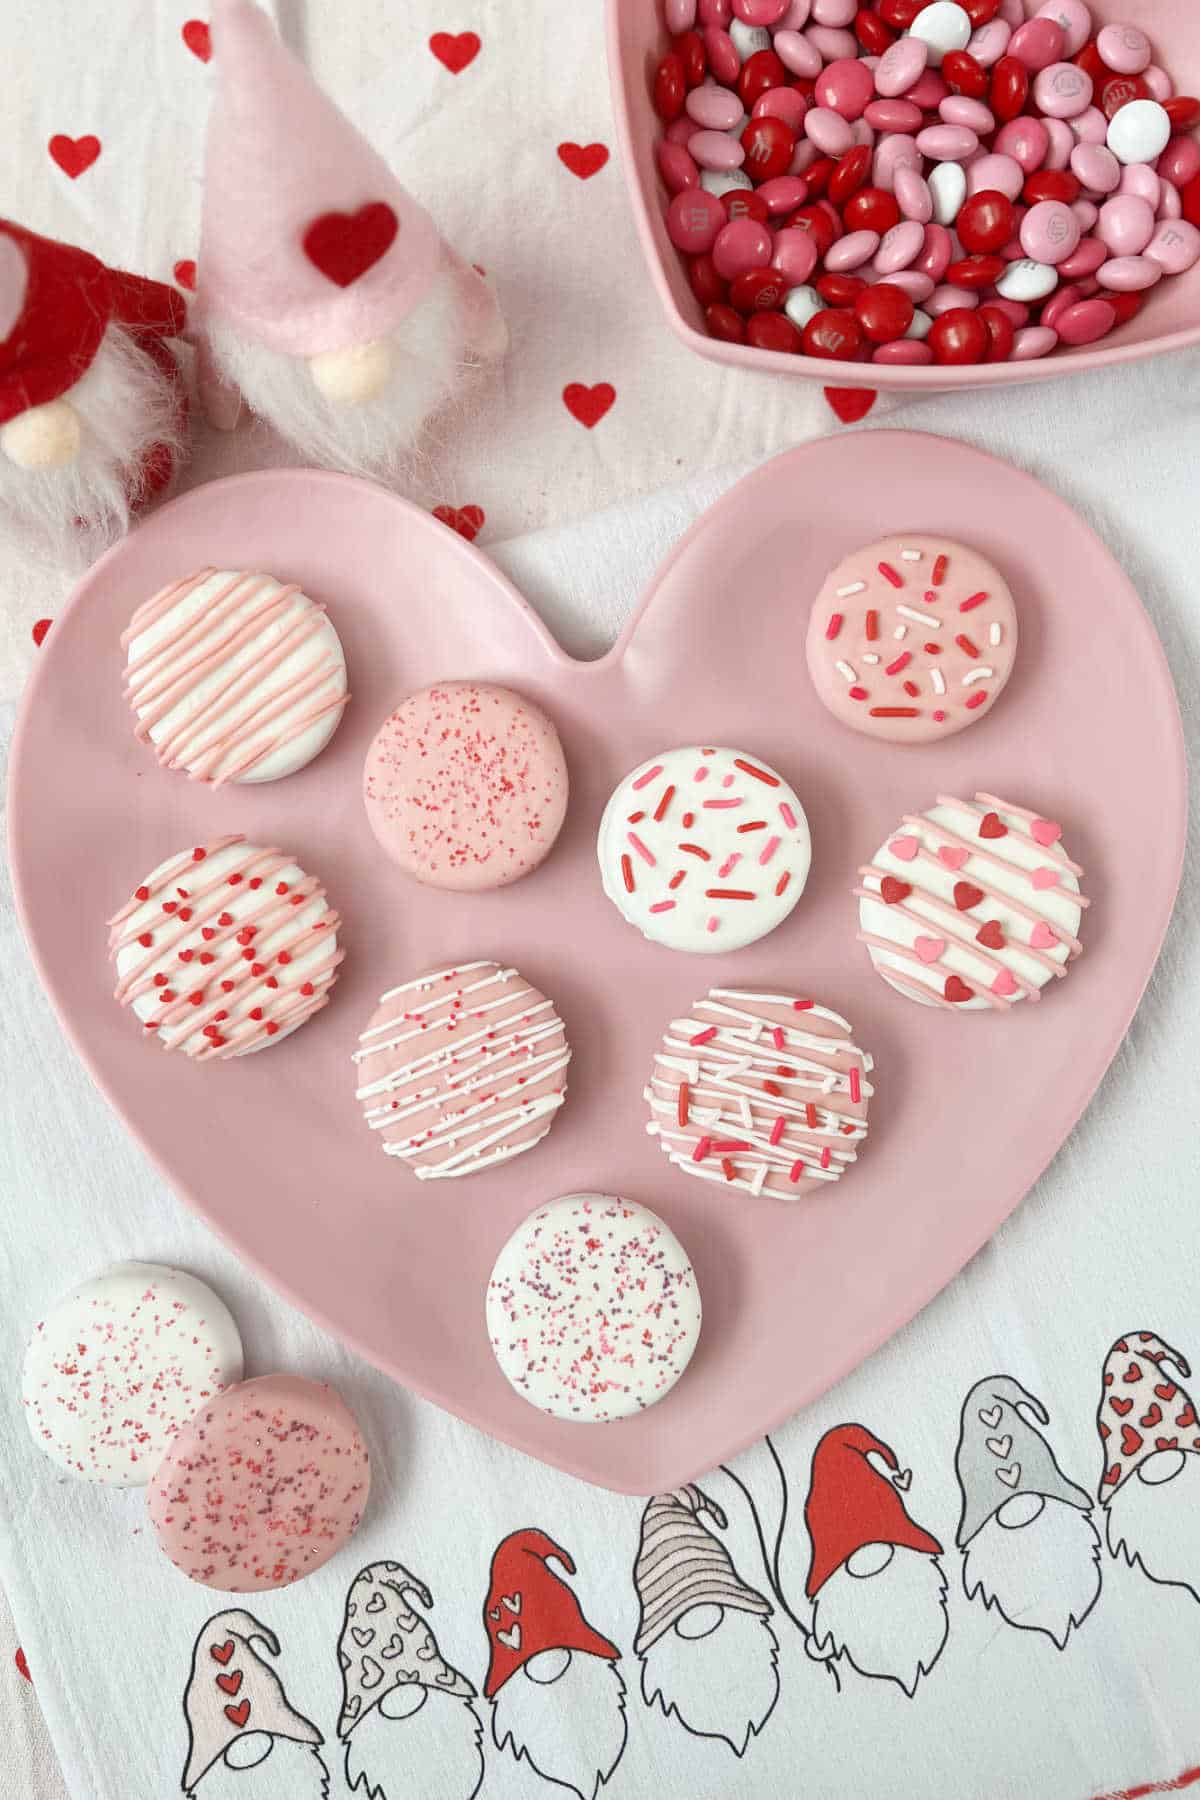 white chocolate covered oreos decorated for Valentines Day on heart plate.